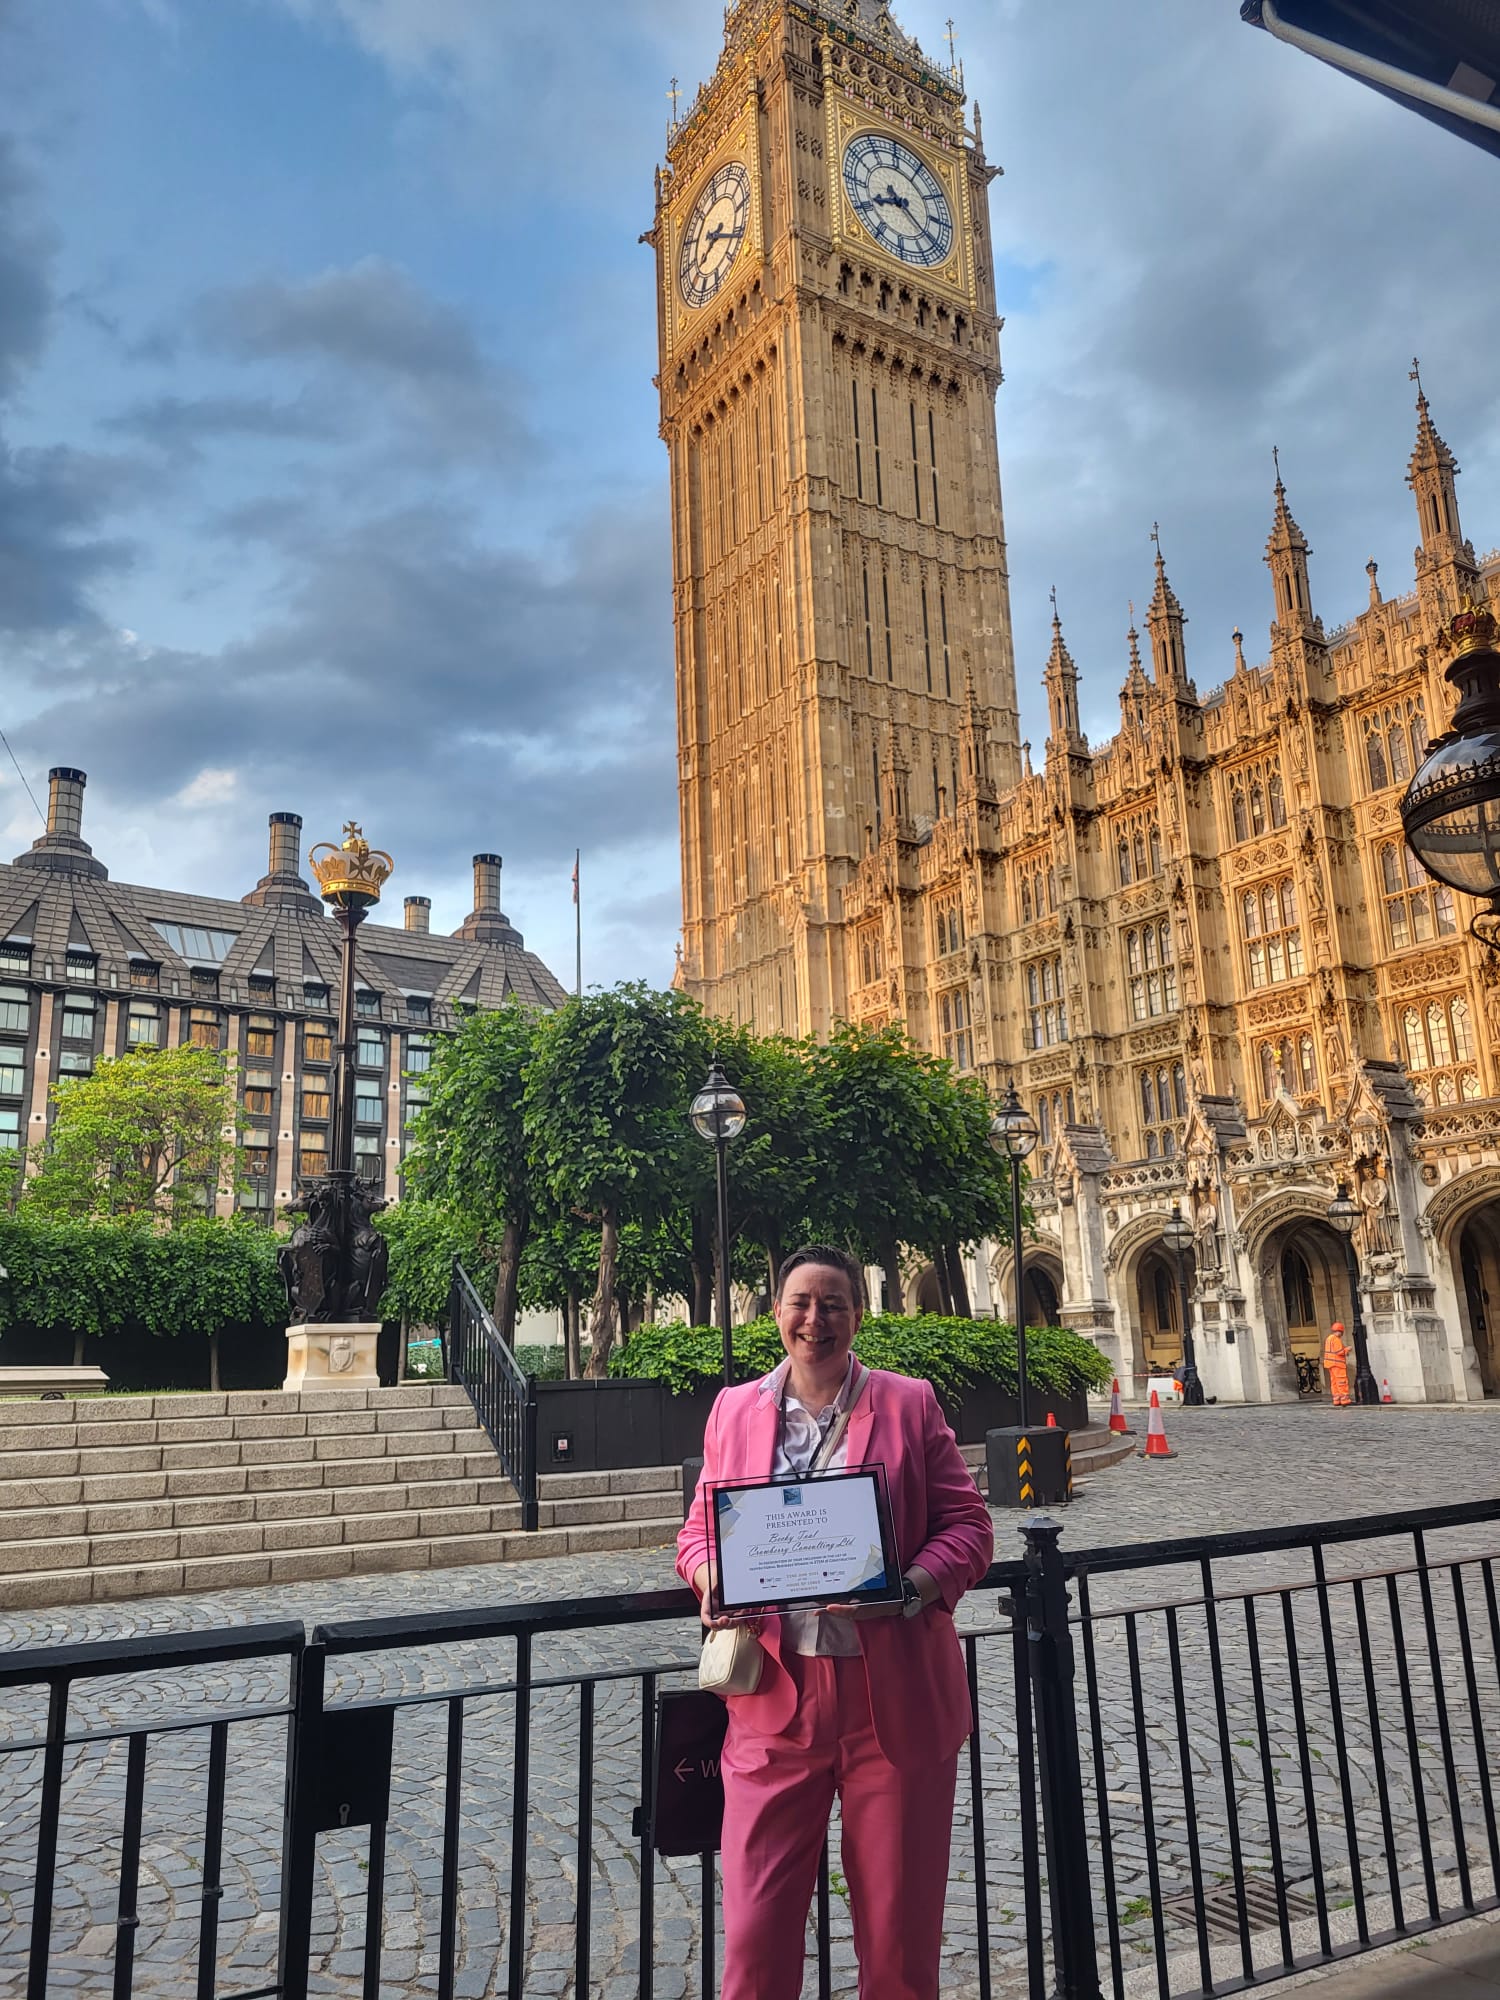 Becky Toal Wins Inspirational Woman in STEM Award at House of Lords